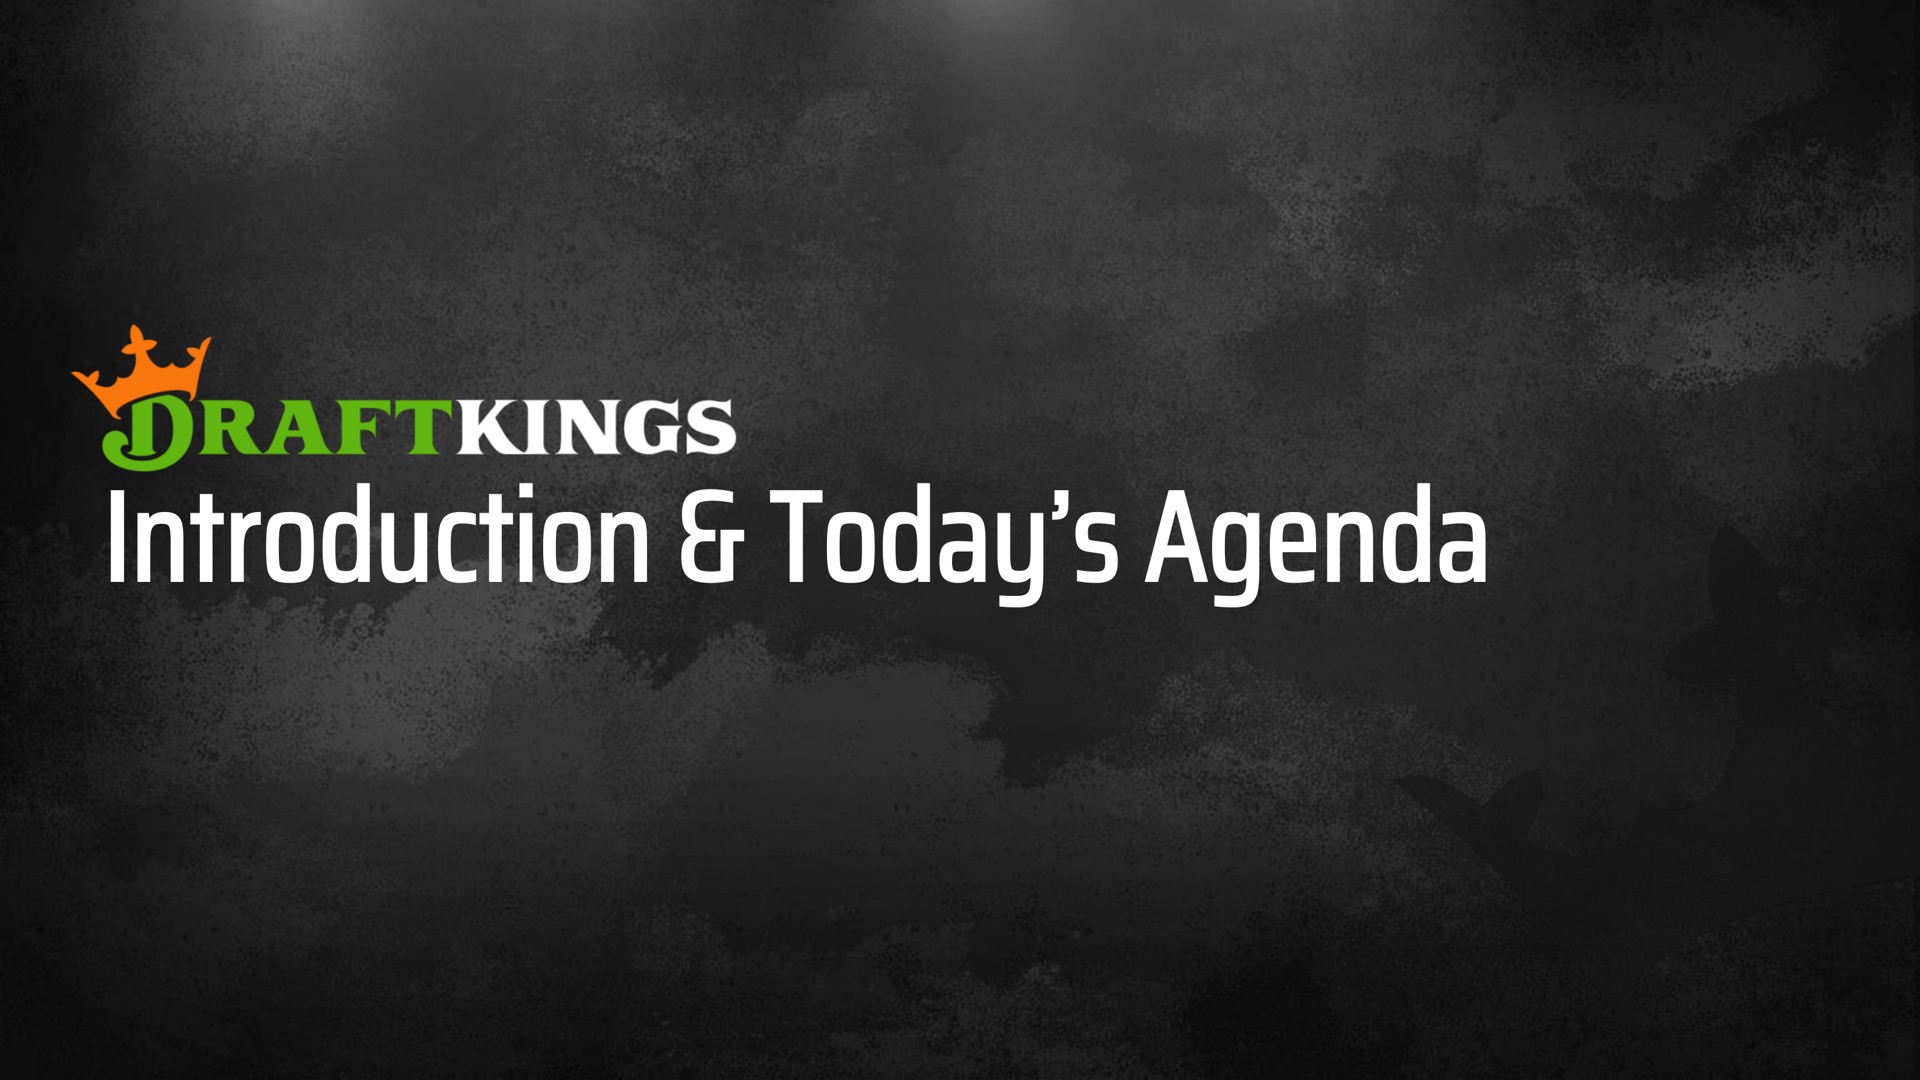 introduction today agenda kings | DraftKings